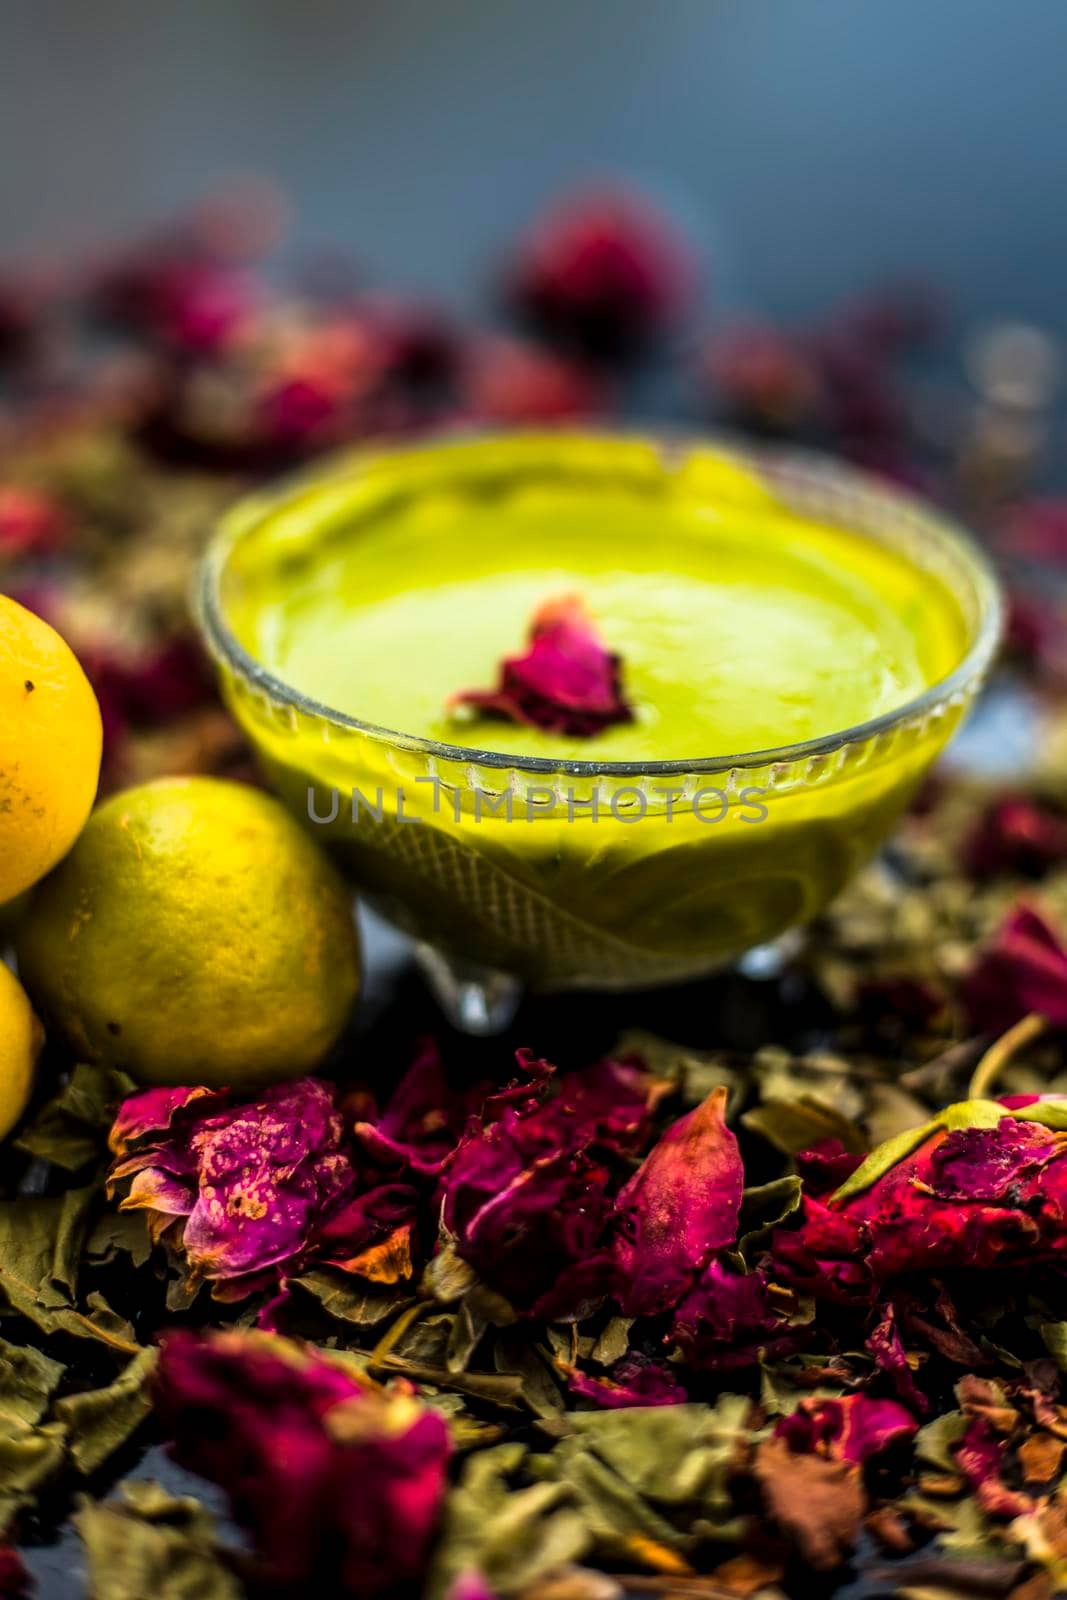 Neem or Indian Lilac face mask on the black wooden surface for oily skin consisting of neem leaves paste and lemon juice well mixed with rose water. by mirzamlk